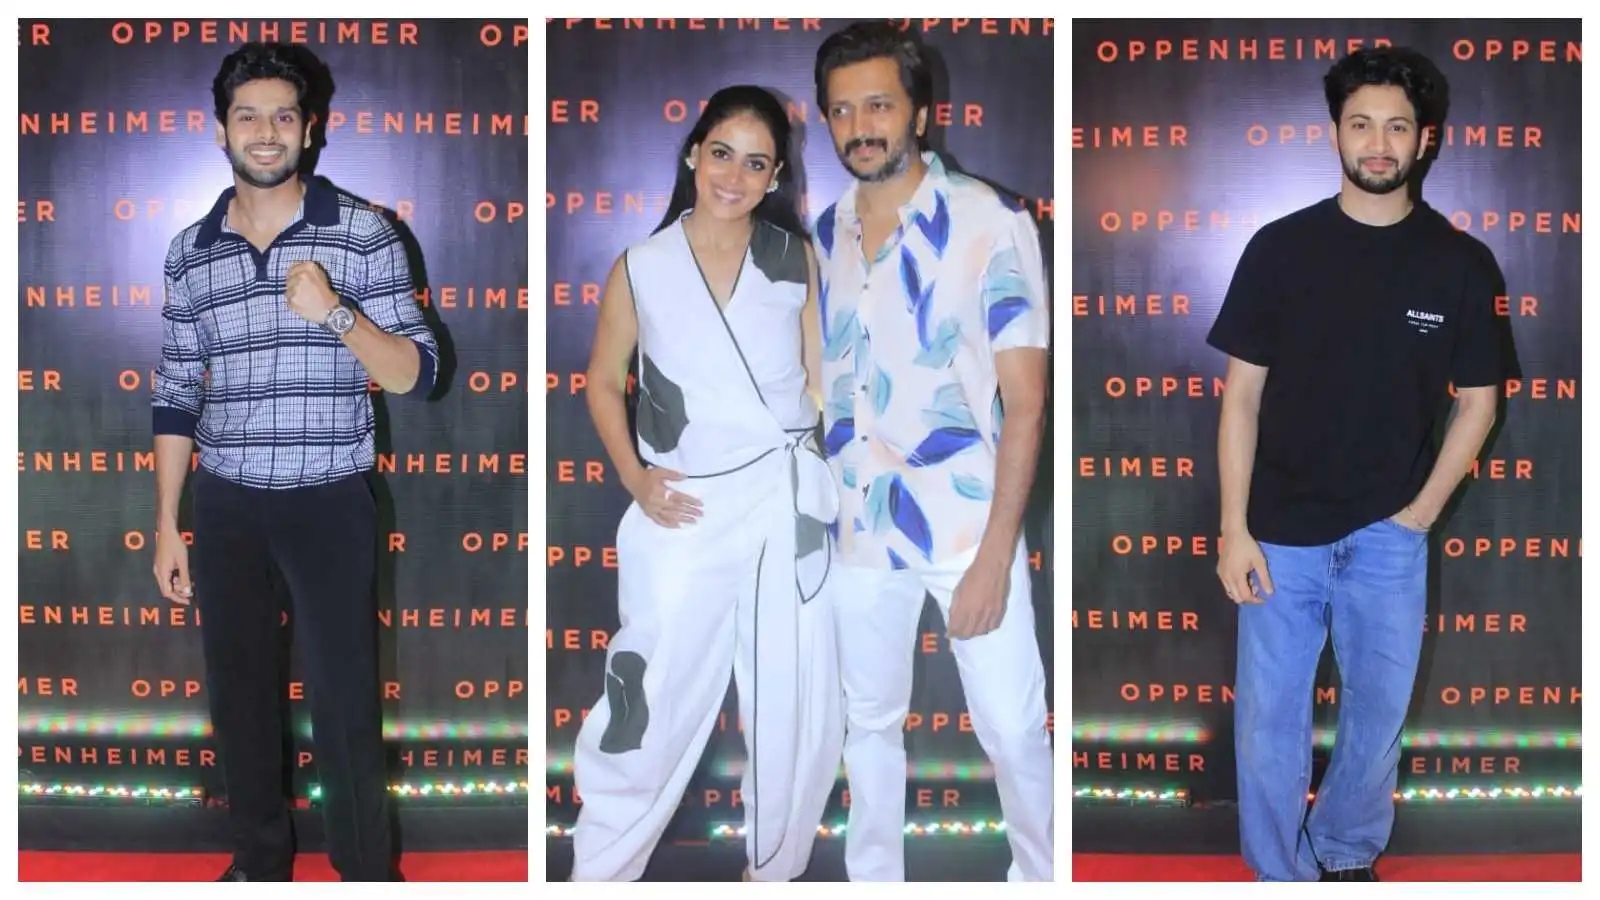 Oppenheimer screening: Genelia D'souza and Riteish Deshmukh twin in white; Abhimanyu Dassani, Rohit Saraf and others attend